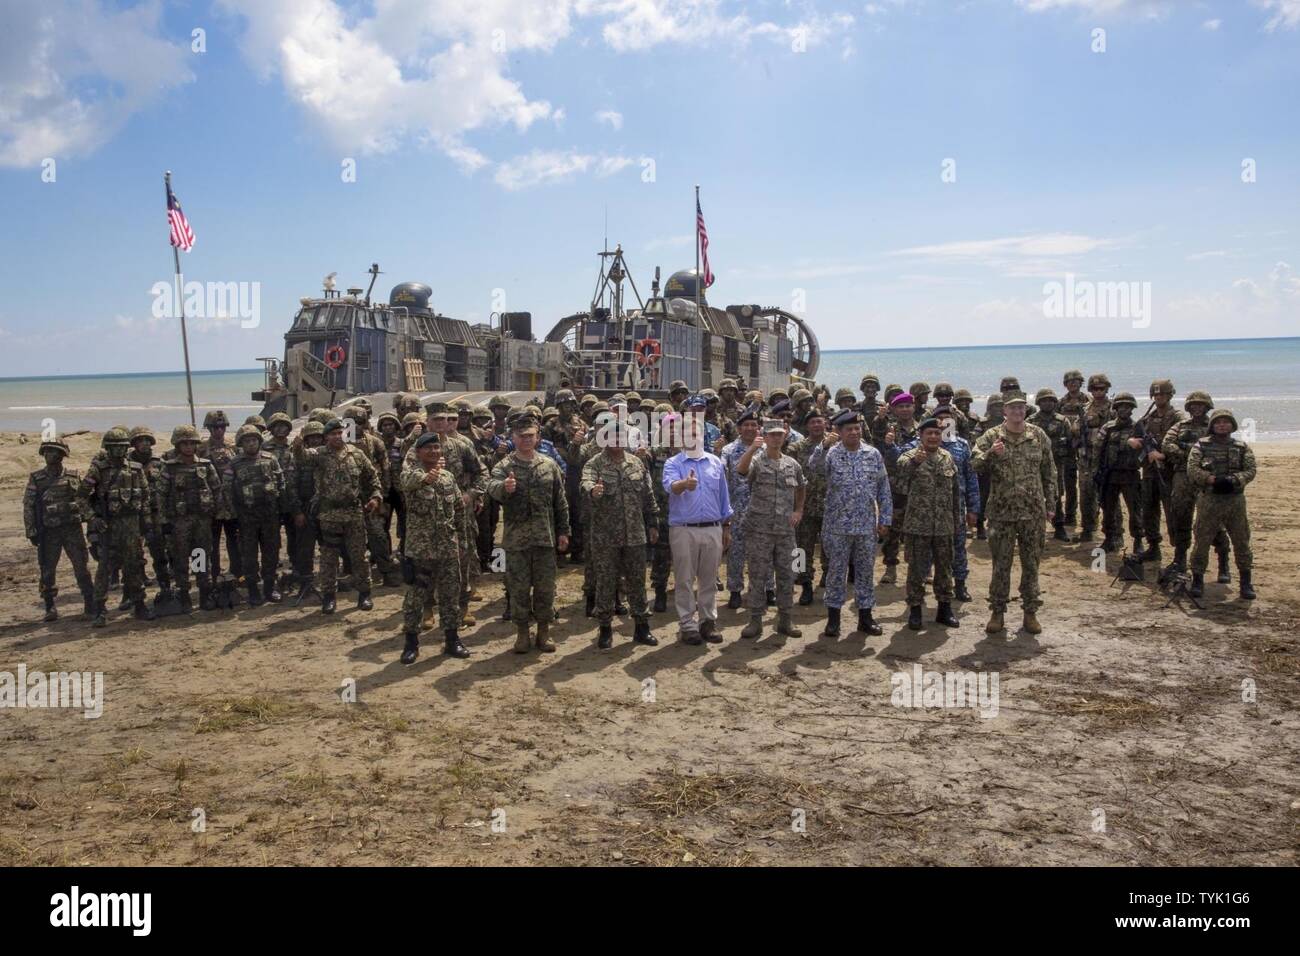 SABAH PROVINCE, Malaysia (Nov. 13, 2016) Senior leadership from the Malaysian Armed Forces, U.S. military and U.S. Embassy Kuala Lumpur stand with Malaysia-U.S. troops to give a “thumbs up” after the Final Exercise of Exercise Tiger Strike 16, Nov. 13, 2016. FINEX consisted of a bilateral amphibious assault. The Malaysia-U.S. forces launched from the USS Makin Island (LHD 8) in MV-22 Ospreys to an objective area where they worked together to secure an enemy held position. Tiger Strike is an opportunity for Malaysia and the United States armed forces to strengthen military-to-military partnersh Stock Photo